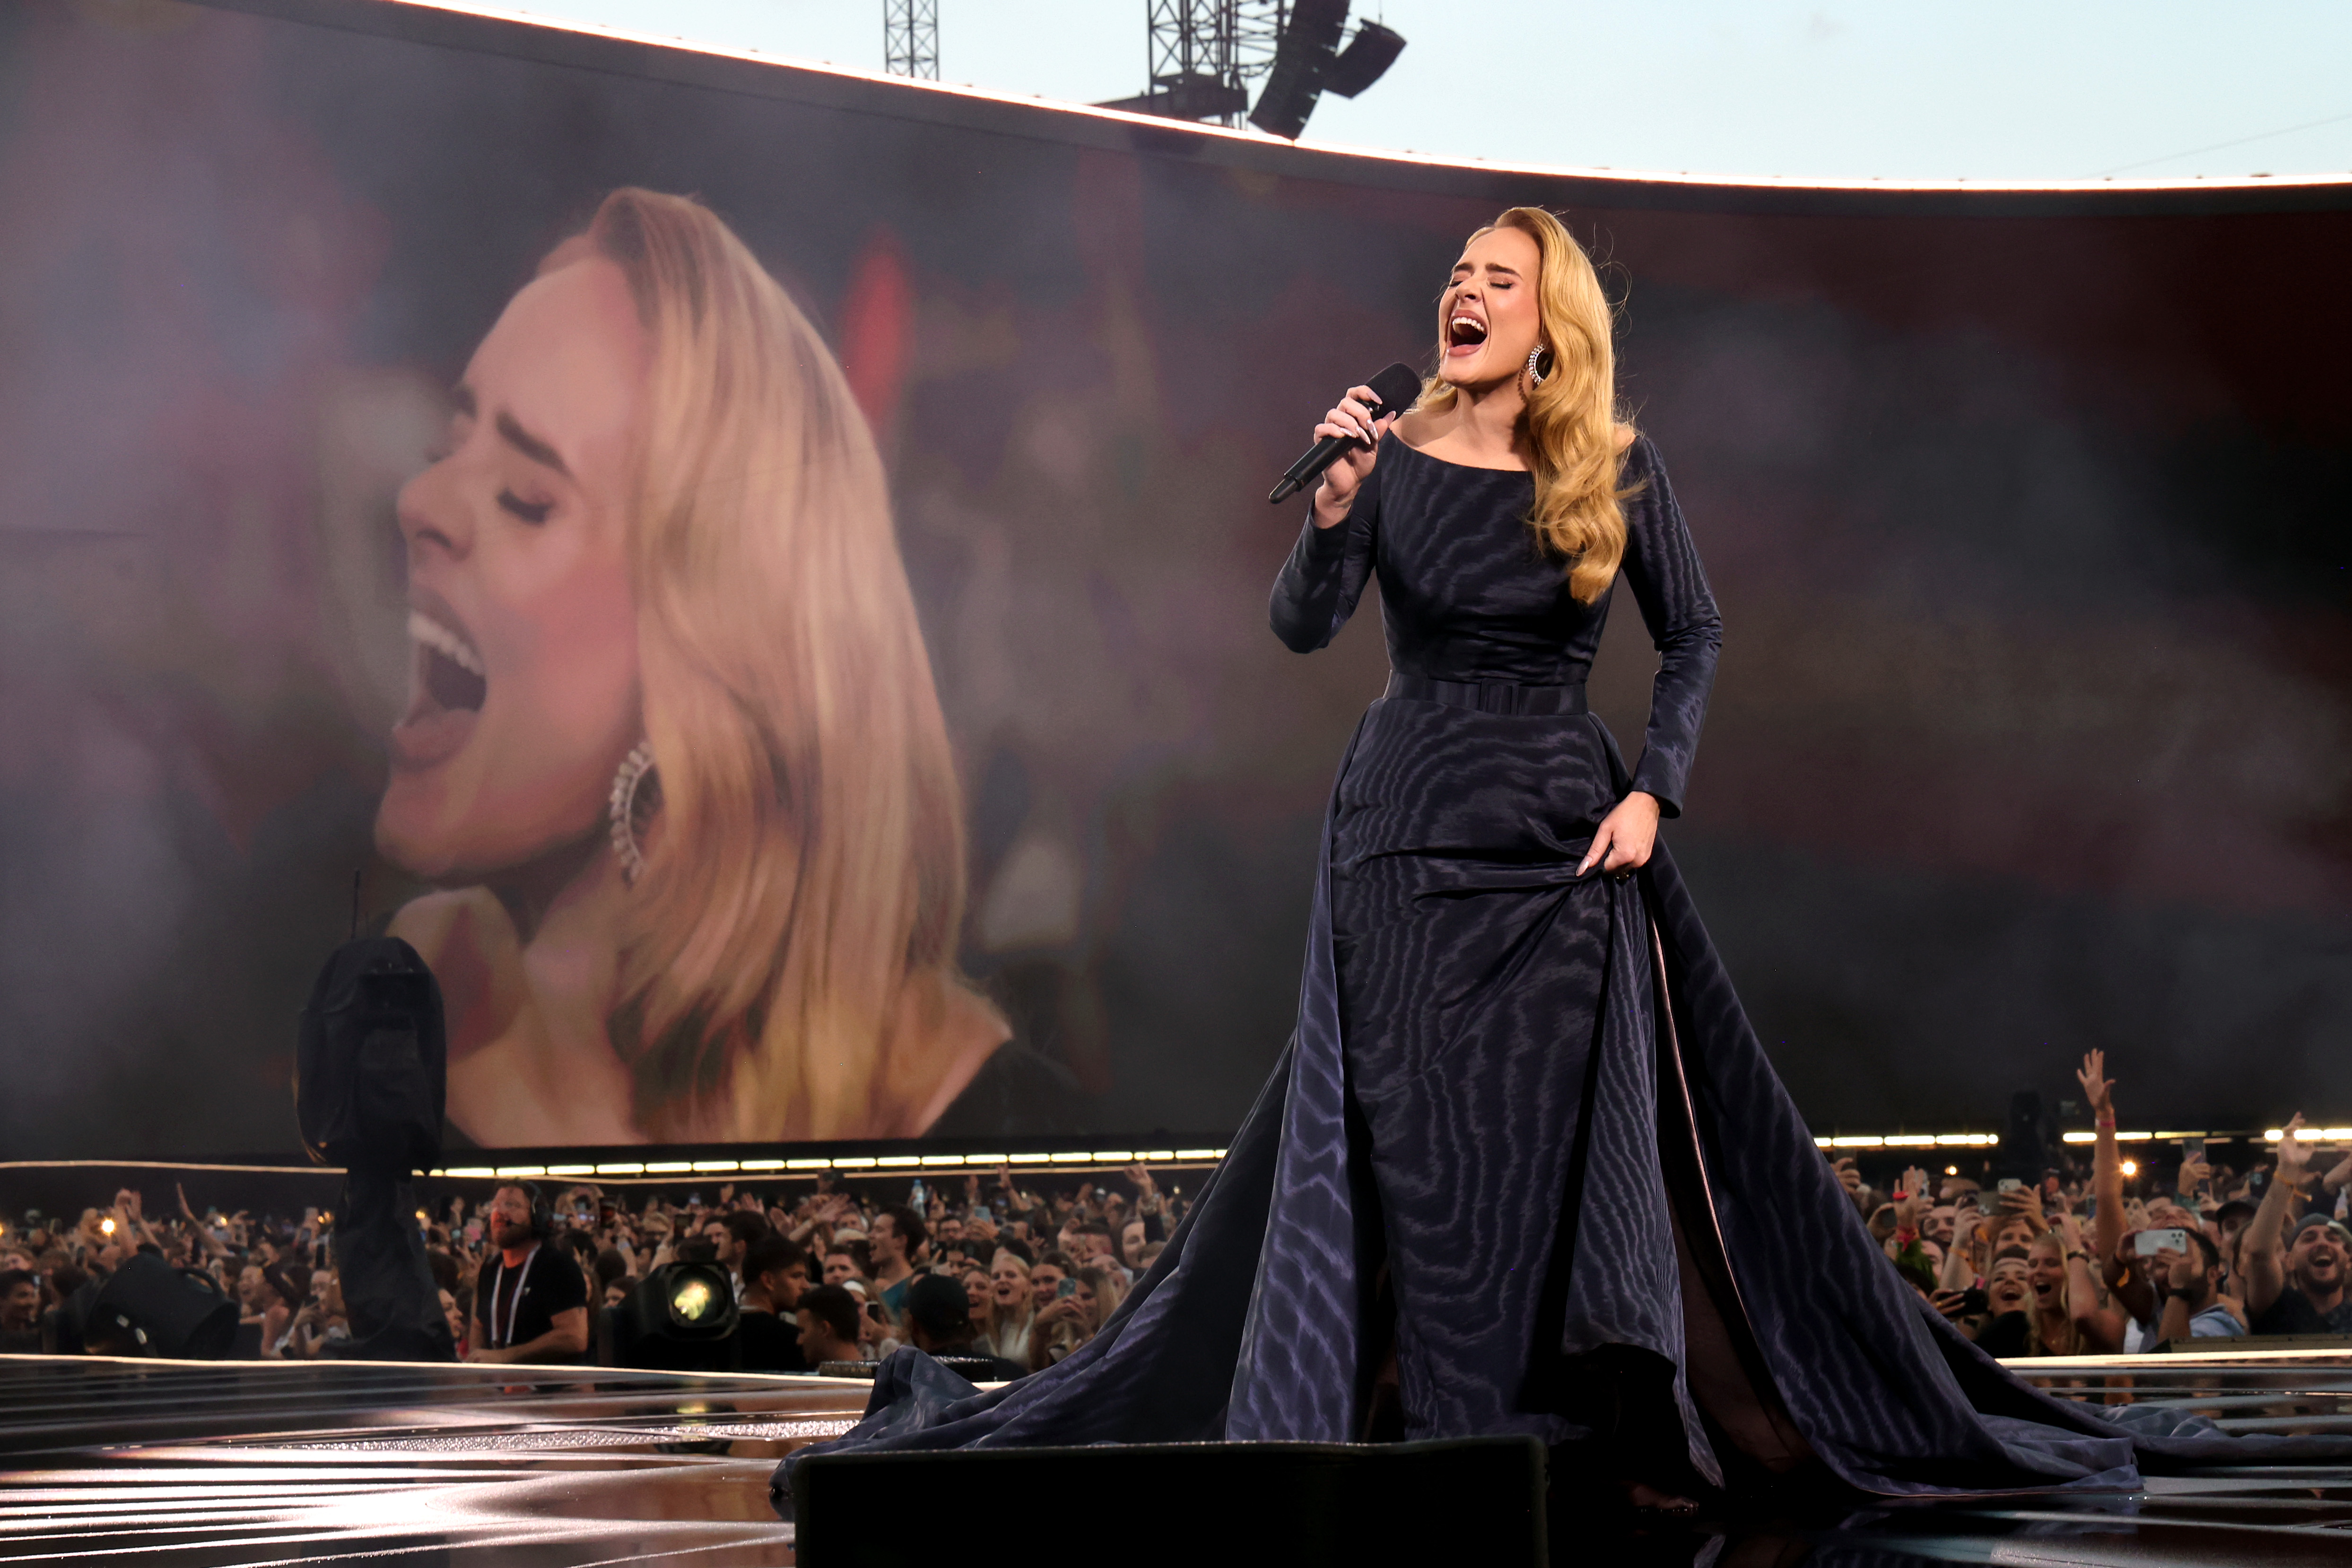 Adele performed her favourite tracks to the delight of her loyal fans